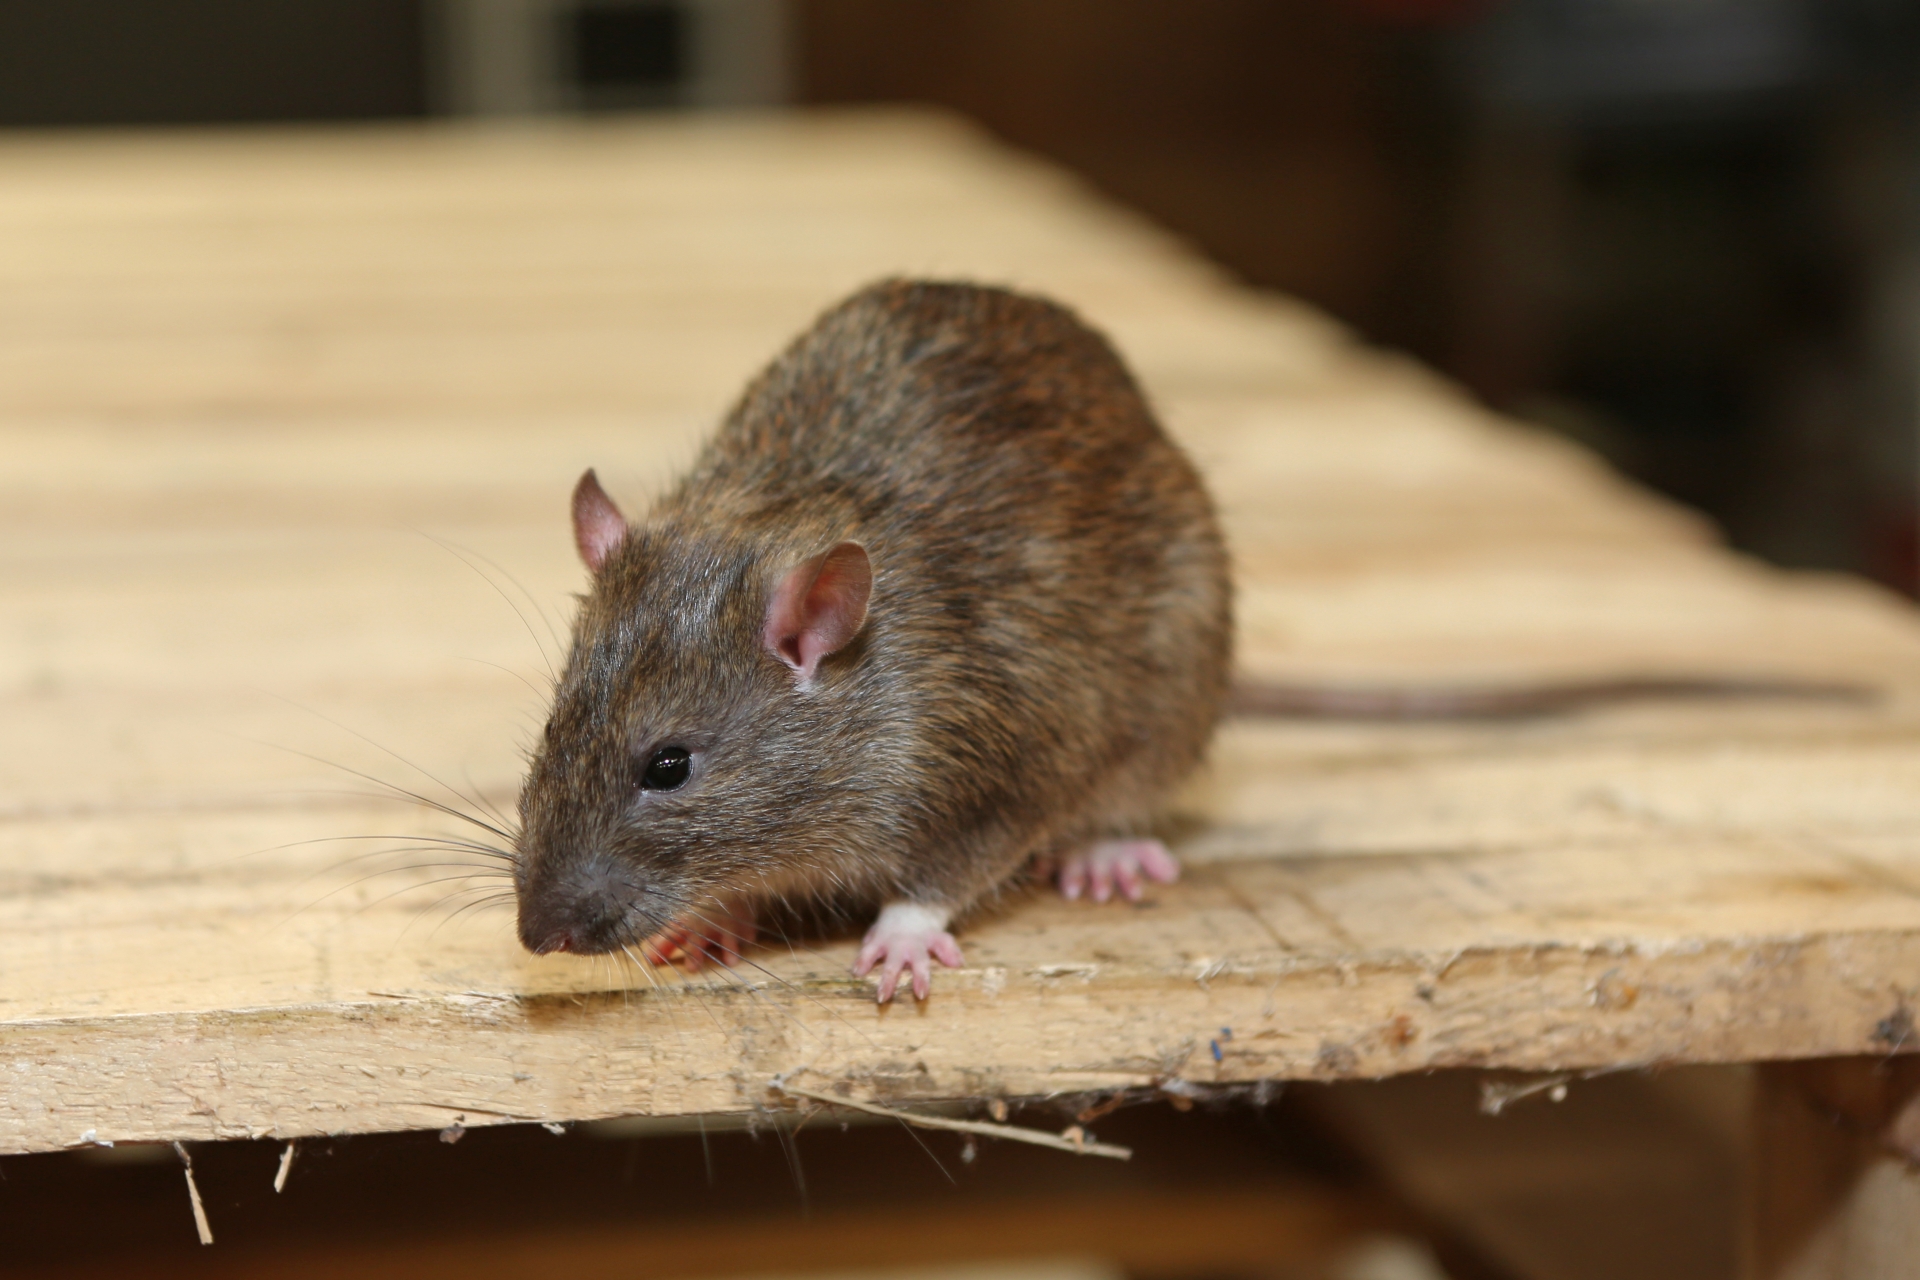 Rat Infestation, Pest Control in Alexandra Palace, Wood Green, N22. Call Now 020 8166 9746